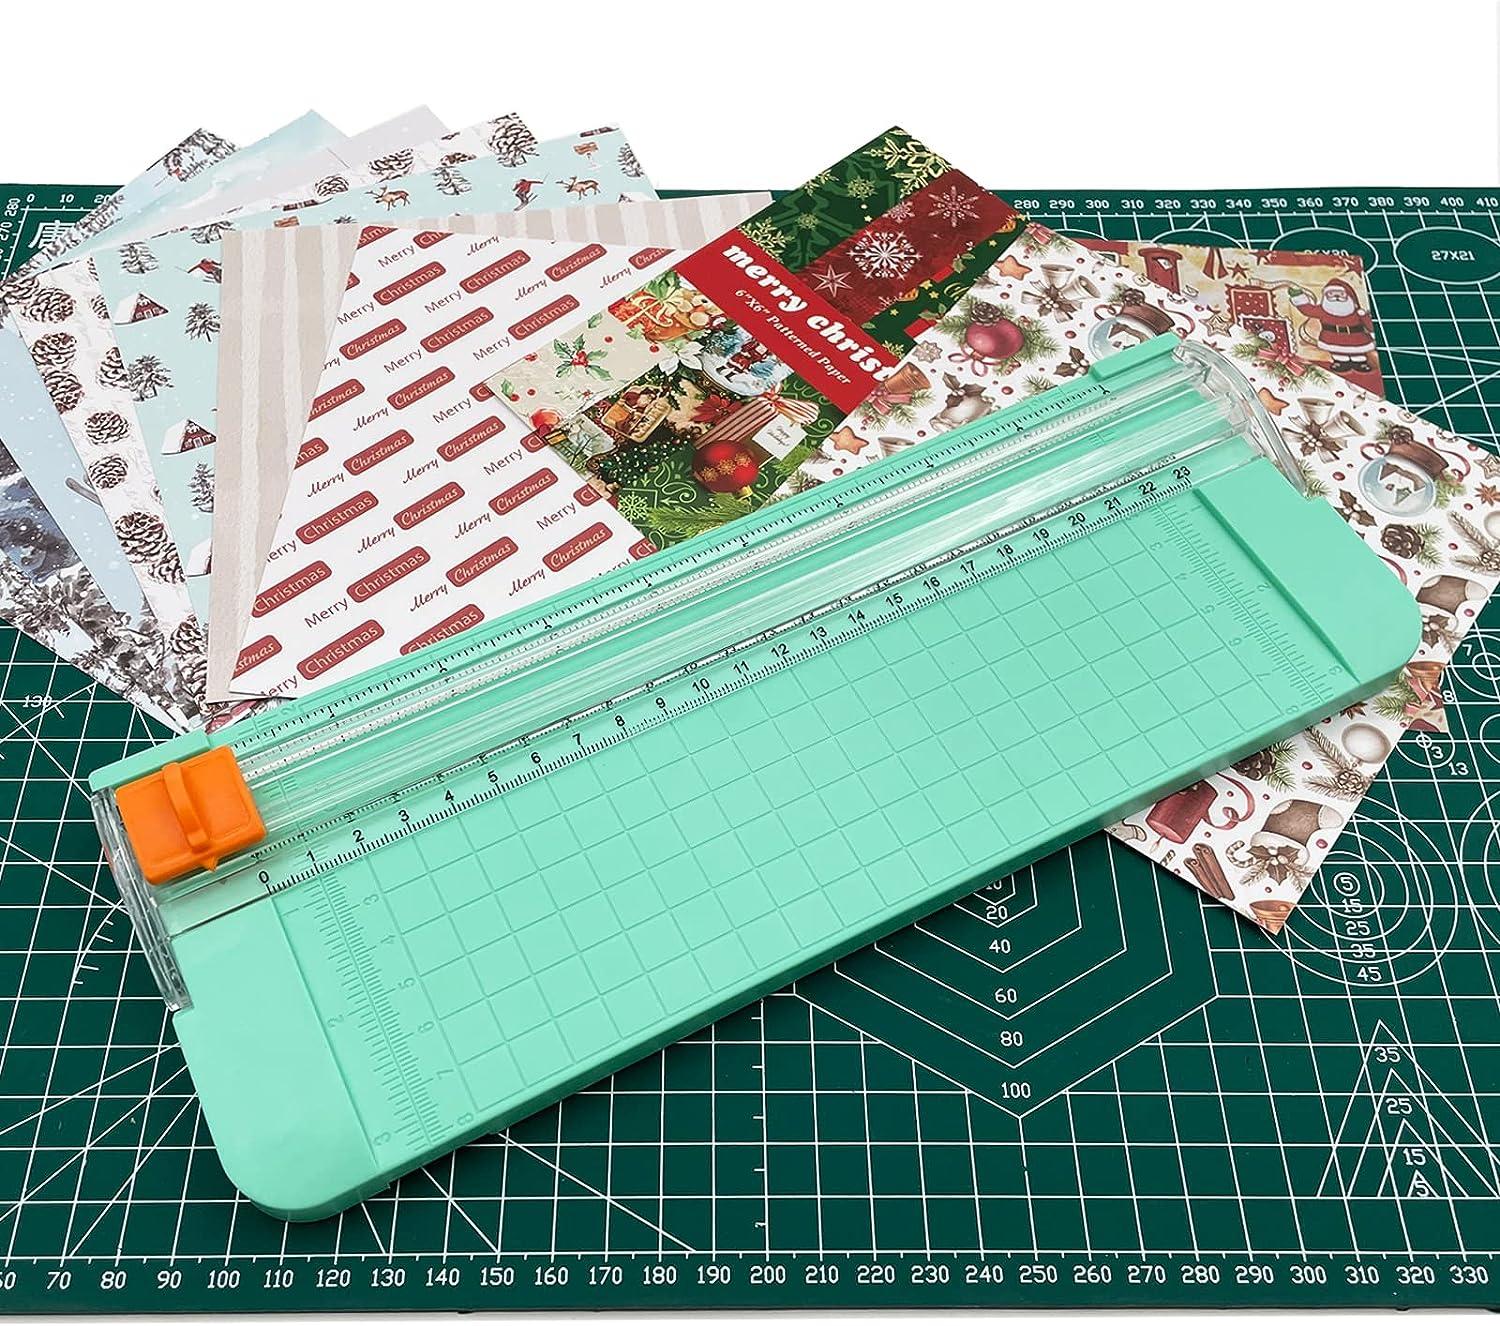  QYQRQF Paper Cutter, A4 Paper Trimmer with Security